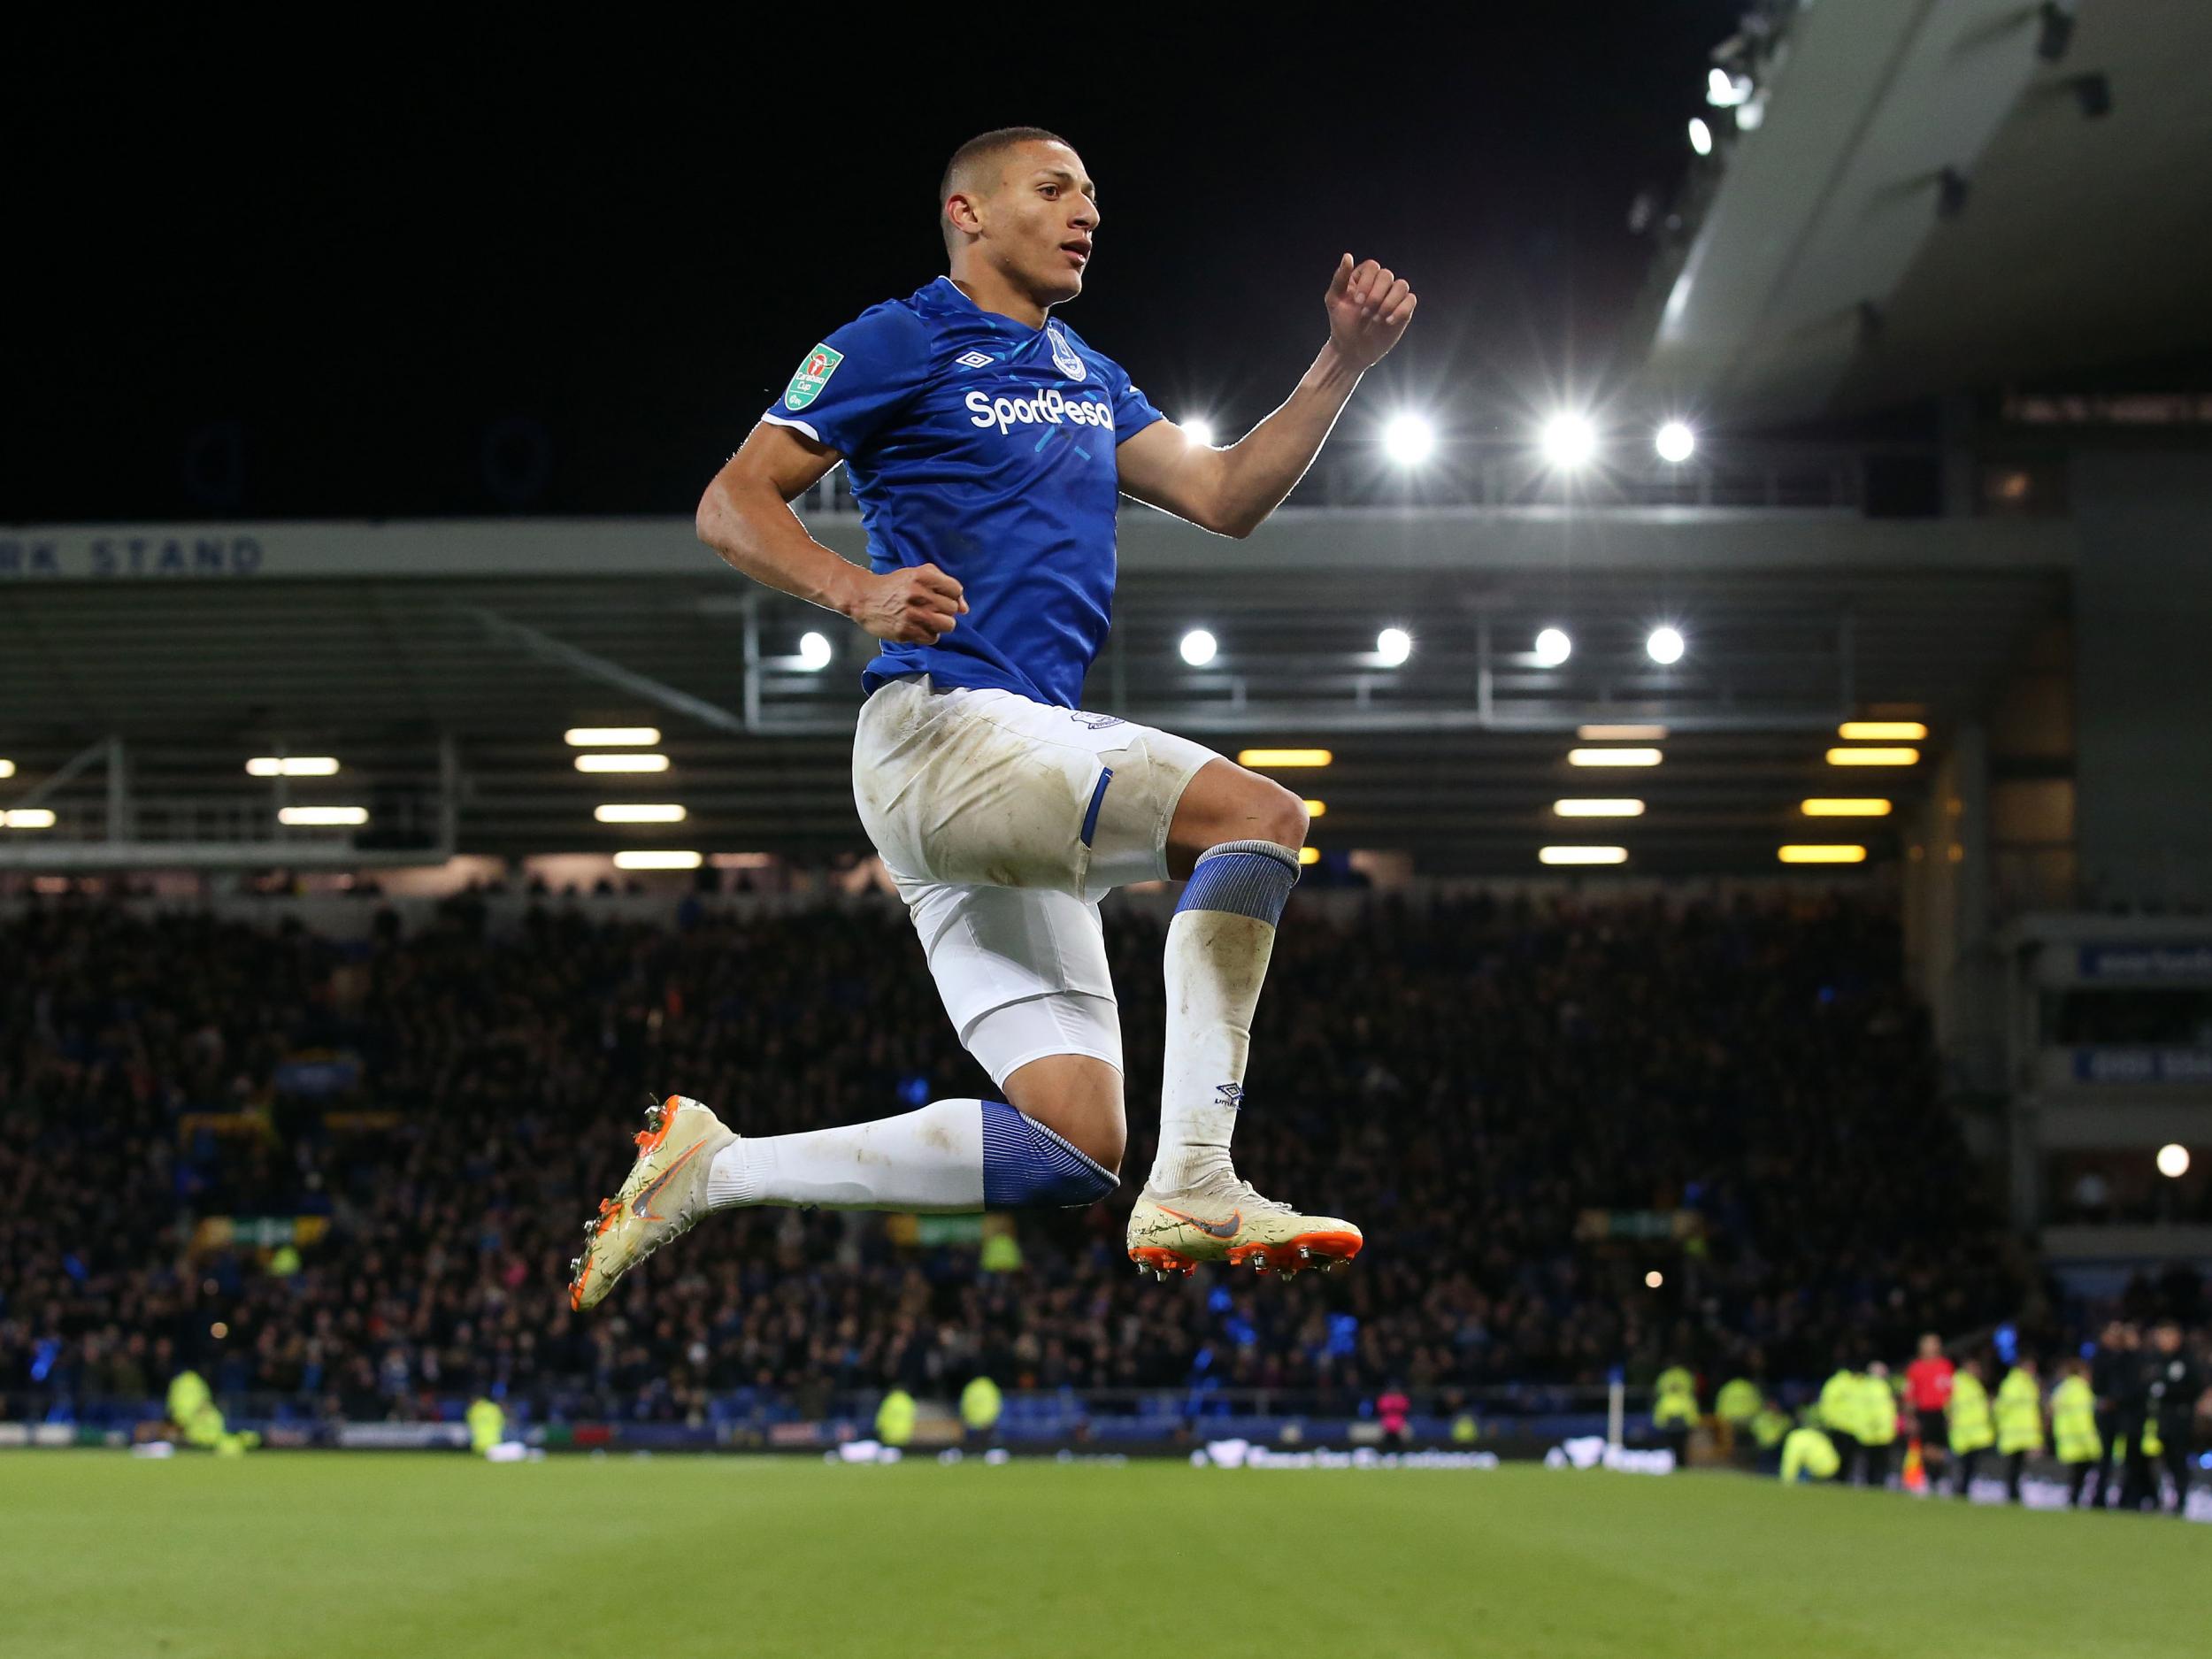 Richarlison helped Everton to victory against his former club